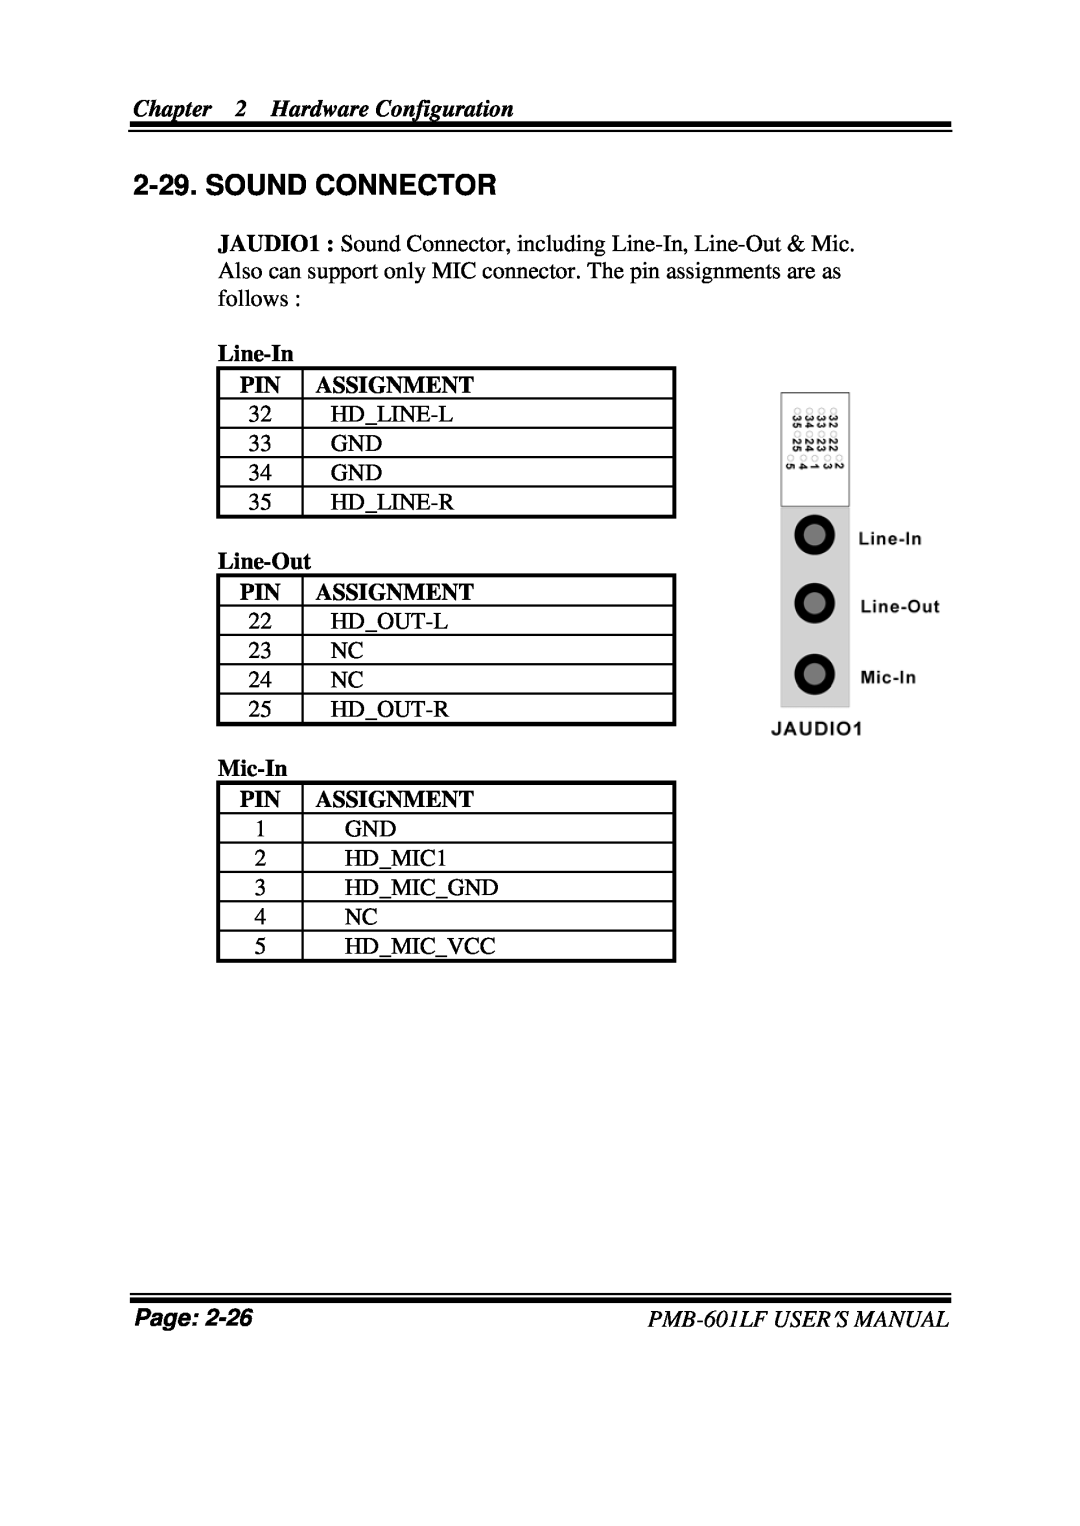 Intel PMB-601LF user manual Sound Connector, Line-In PIN ASSIGNMENT, Line-Out PIN ASSIGNMENT, Mic-In PIN ASSIGNMENT, Page 